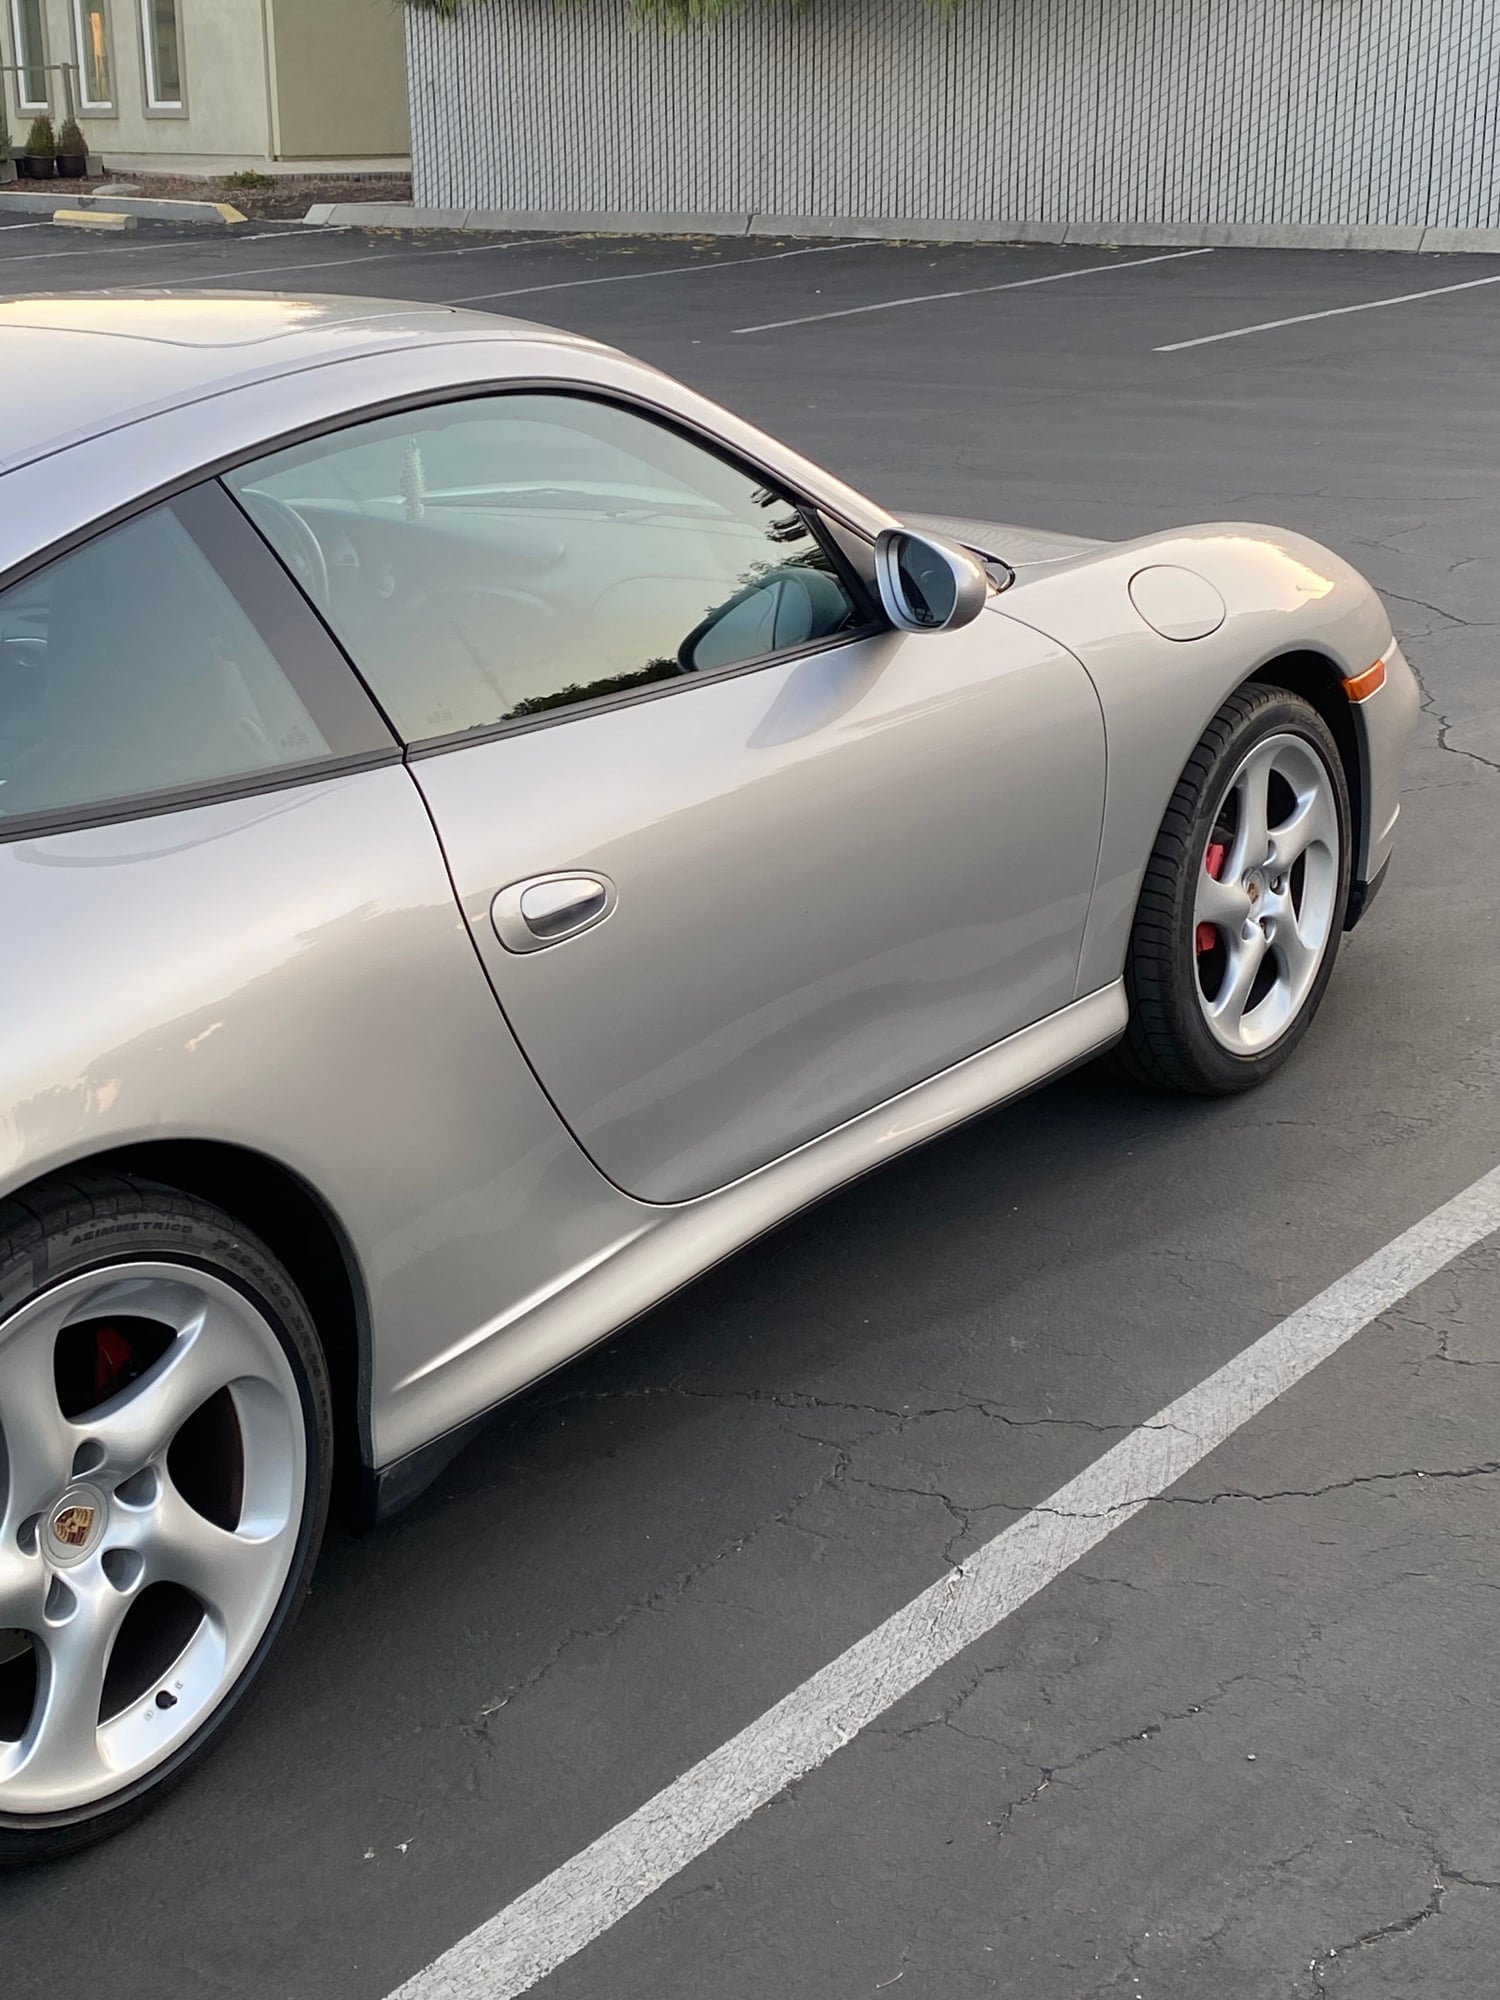 2003 Porsche 911 - 2003 Porsche 911 C4S 29k miles 6 speed - Used - VIN WP0AA29553S623329 - 29,700 Miles - 6 cyl - 4WD - Manual - Coupe - Silver - San Jose, CA 95123, United States